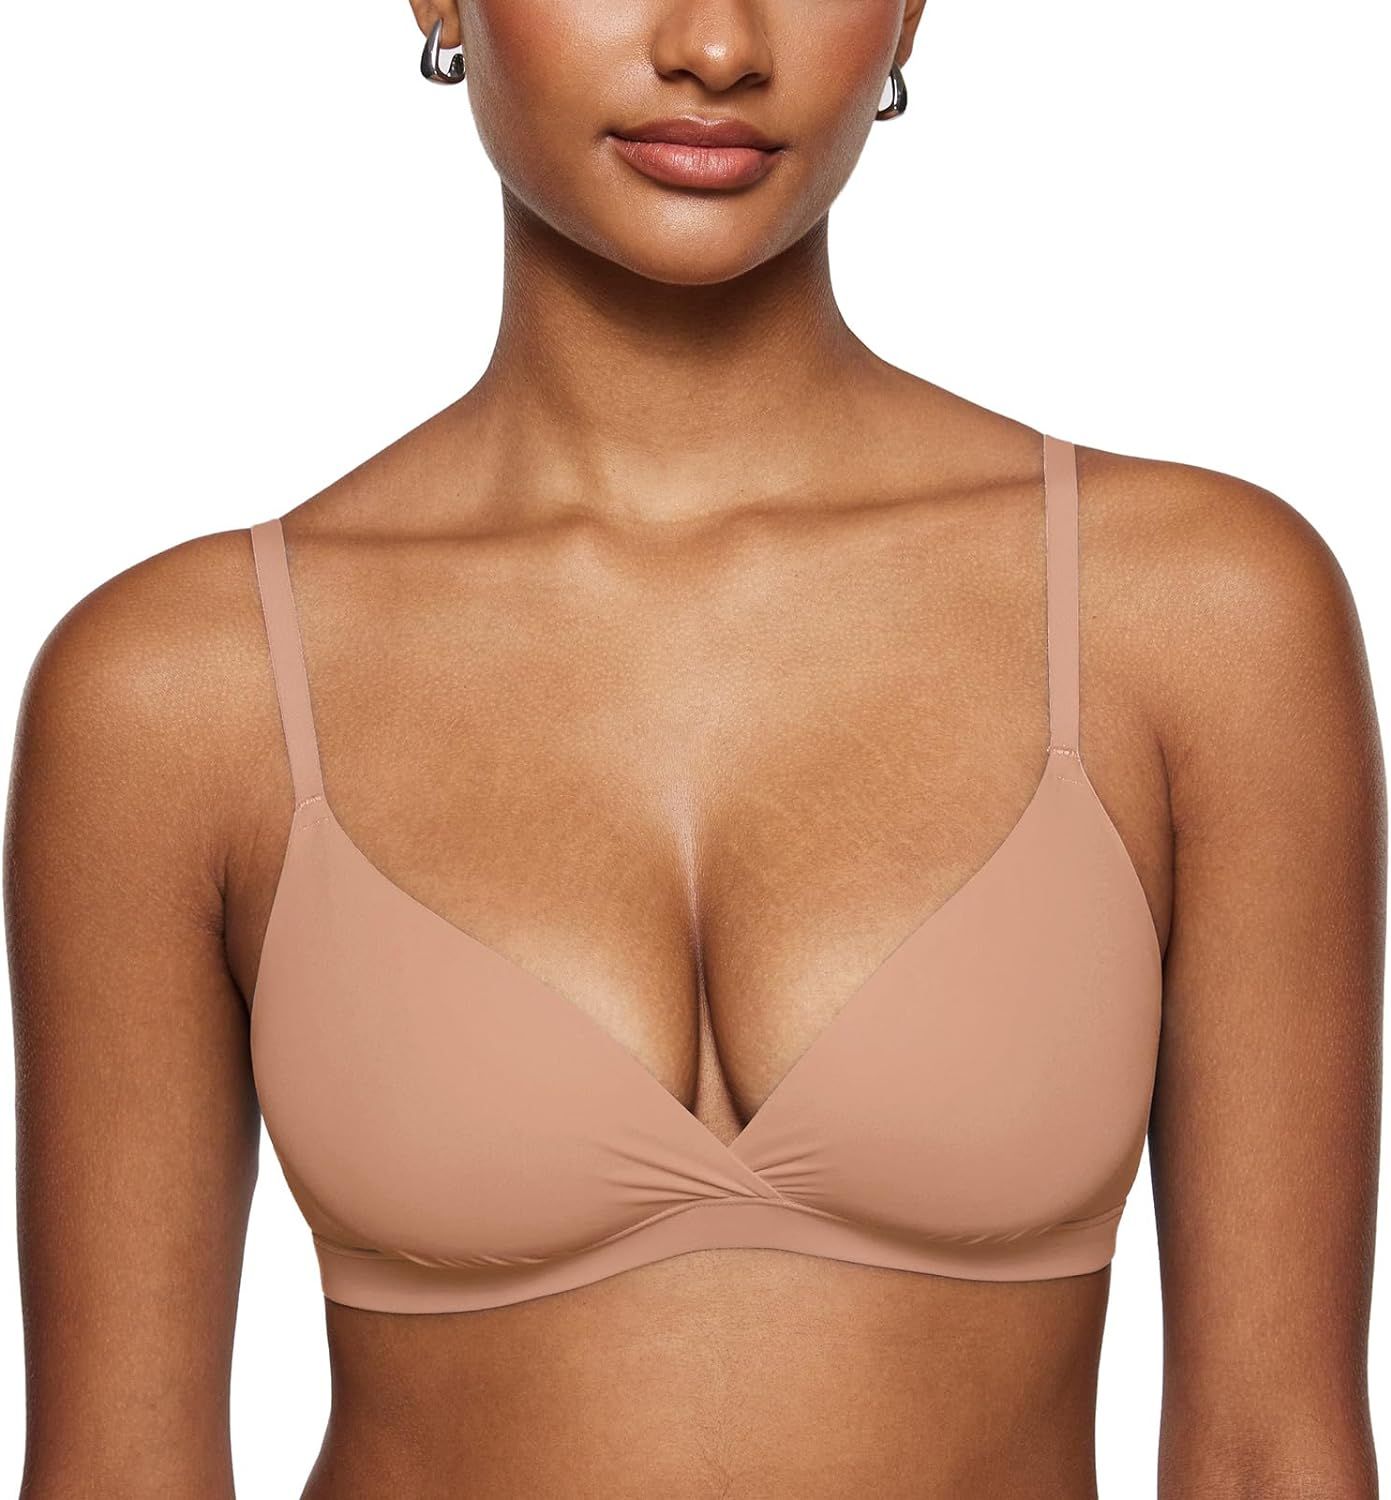 INLYRIC Women's Inbarely Triangle Bralette Comfortable Unlined V Neck Wireless Smoothing Bra Top ... | Amazon (US)